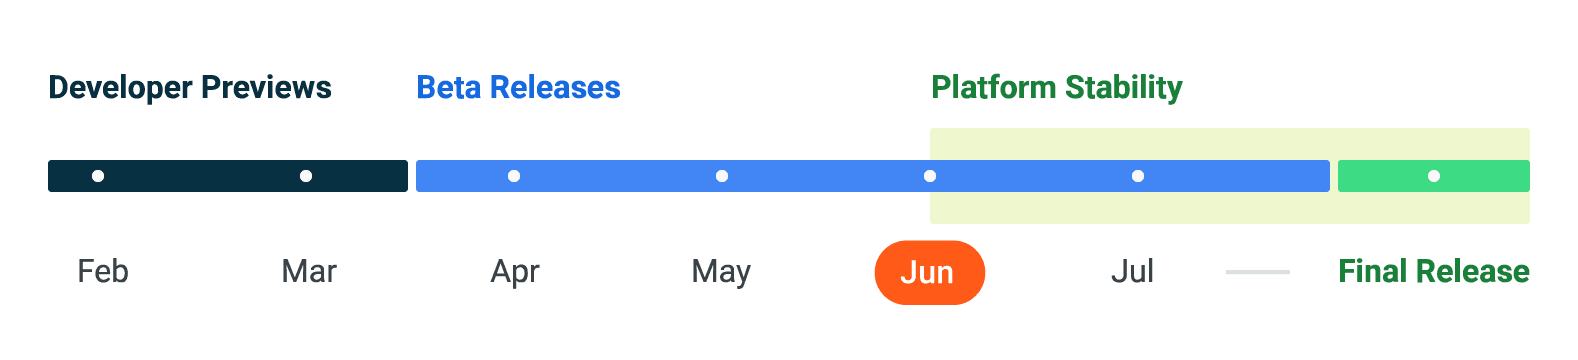 image of timeline illustrates that we are in June and on track with Platform Stability for Android 14